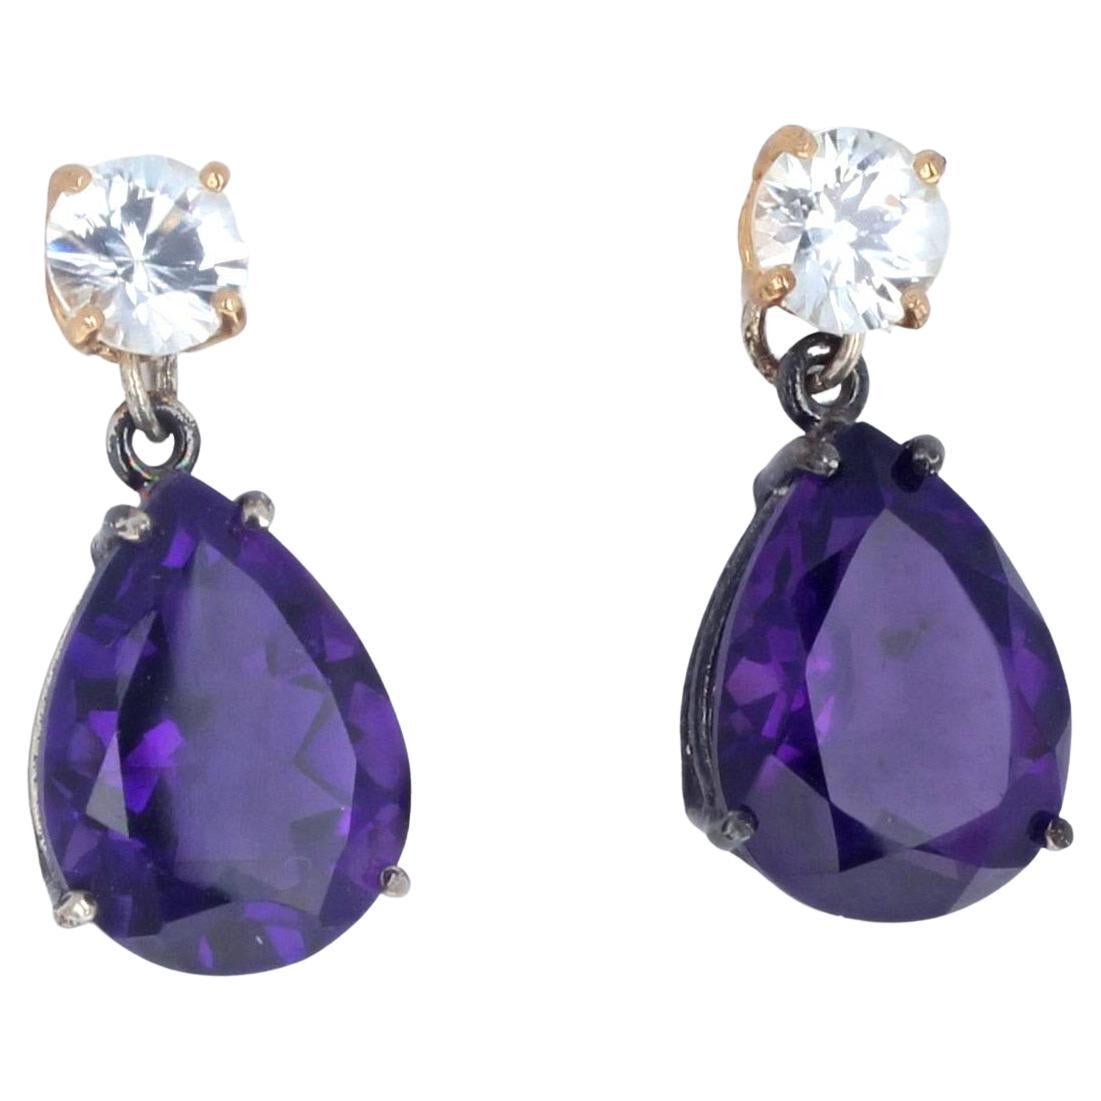 AJD Magnificent Brilliant Natural White Zircon & Intense Amethyst Stud Earrings For Sale